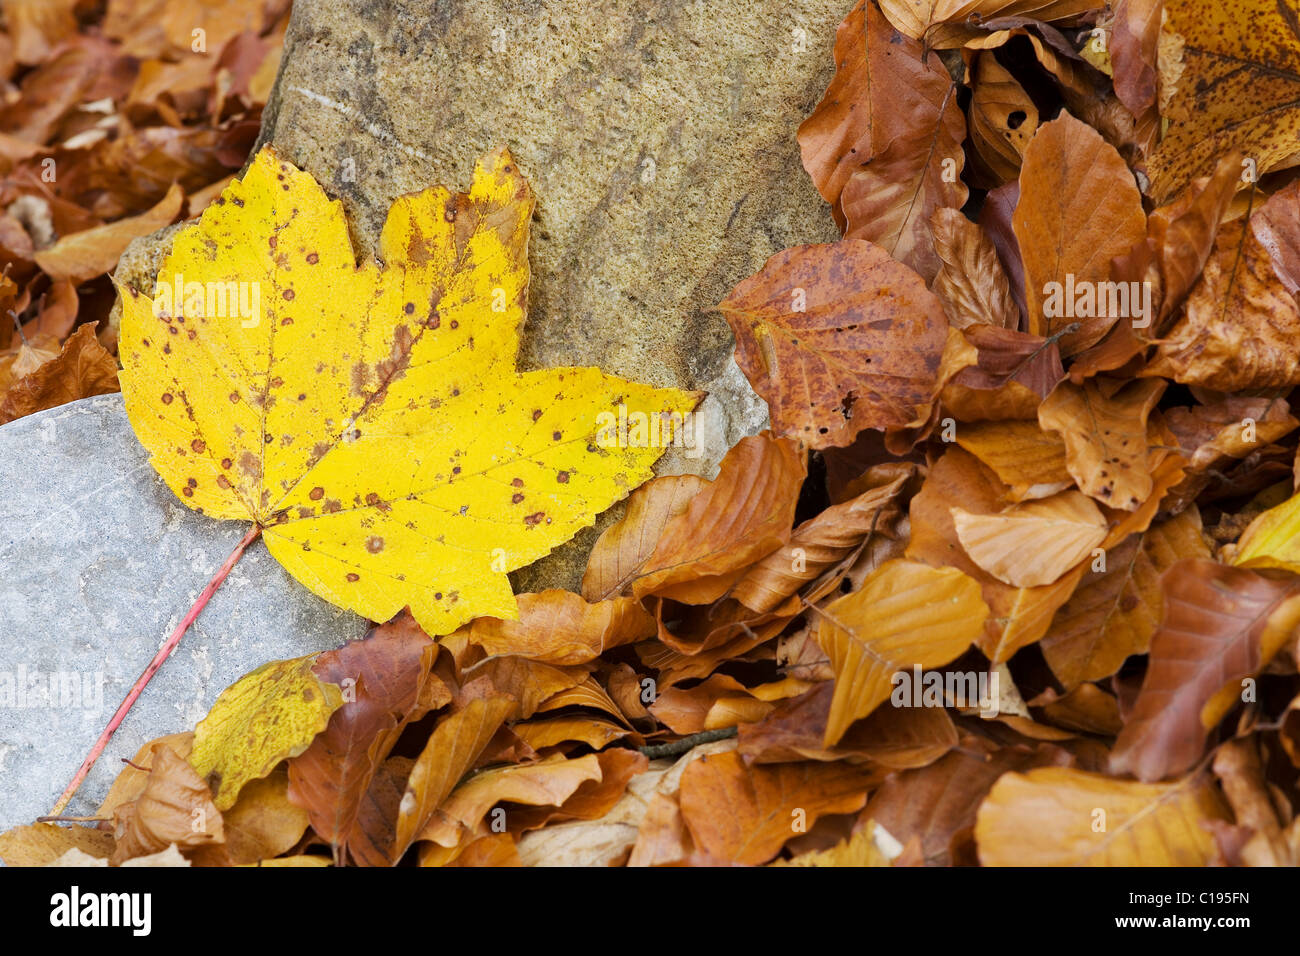 Yellow oak leaf on a stone surrounded by dried beech leaves Stock Photo